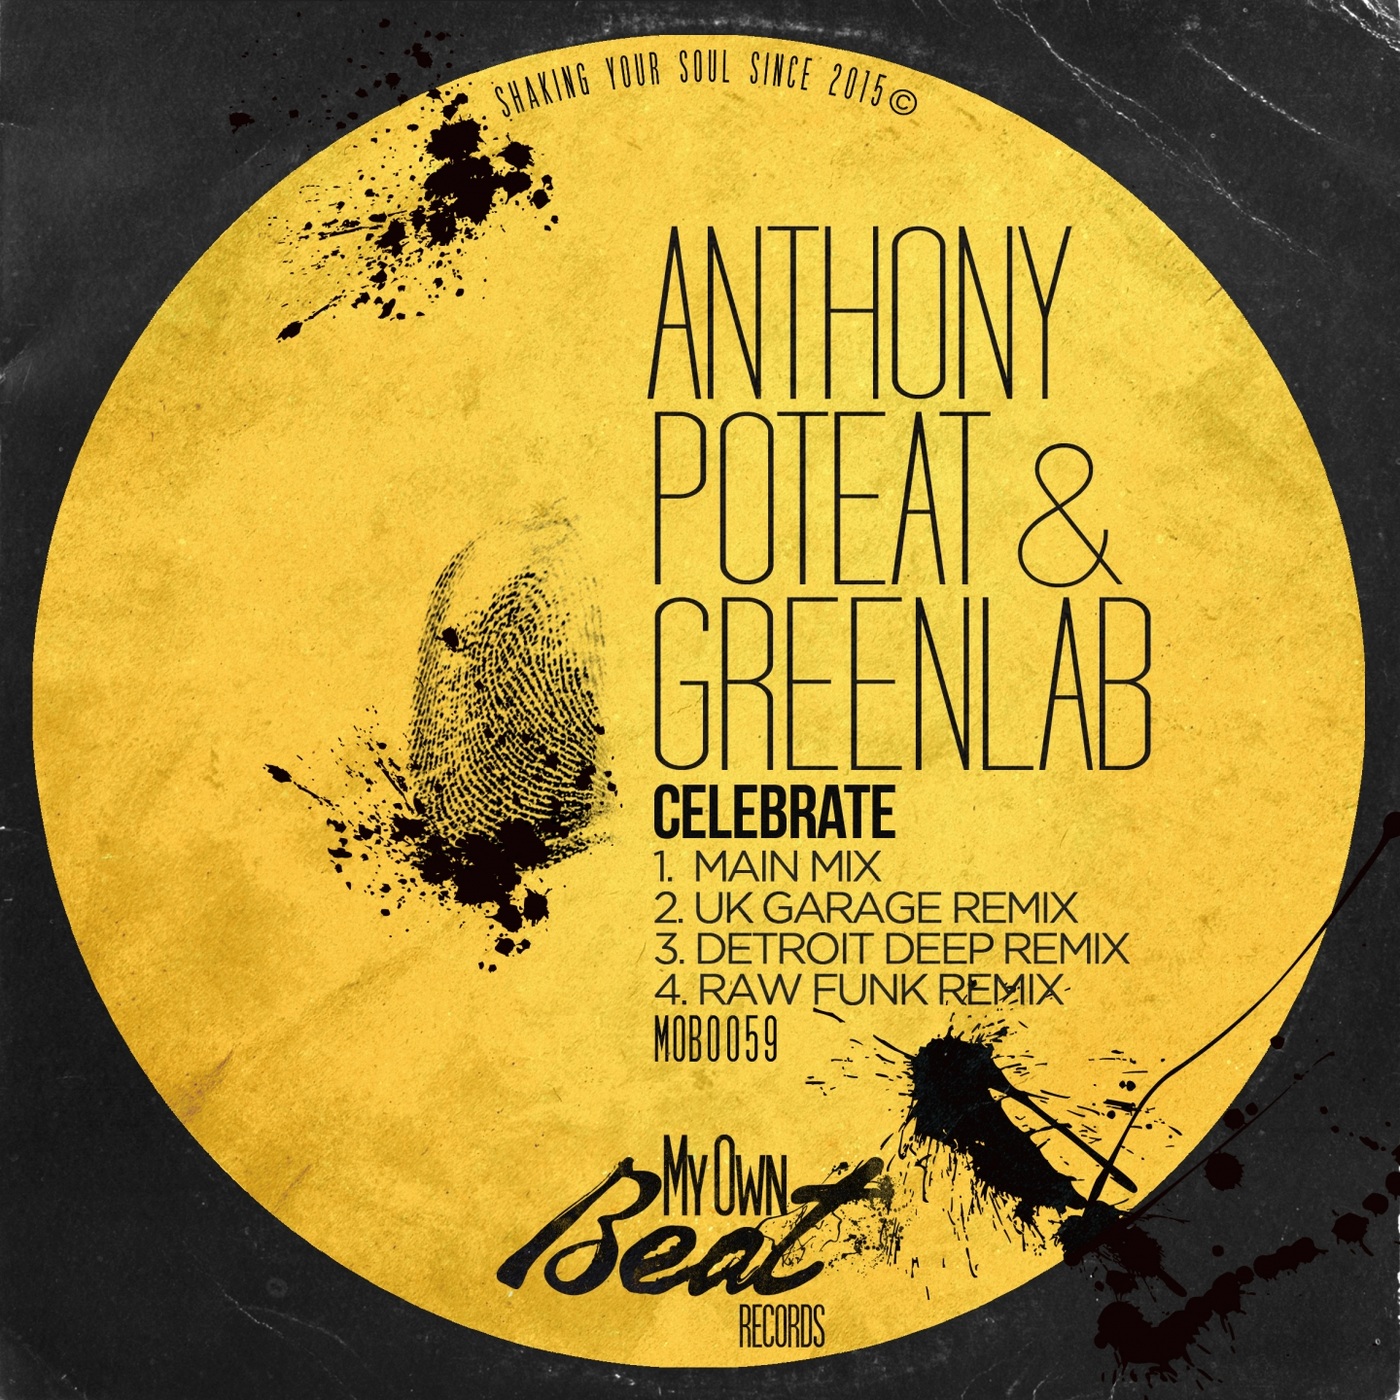 Anthony Poteat & Greenlab - Celebrate / My Own Beat Records